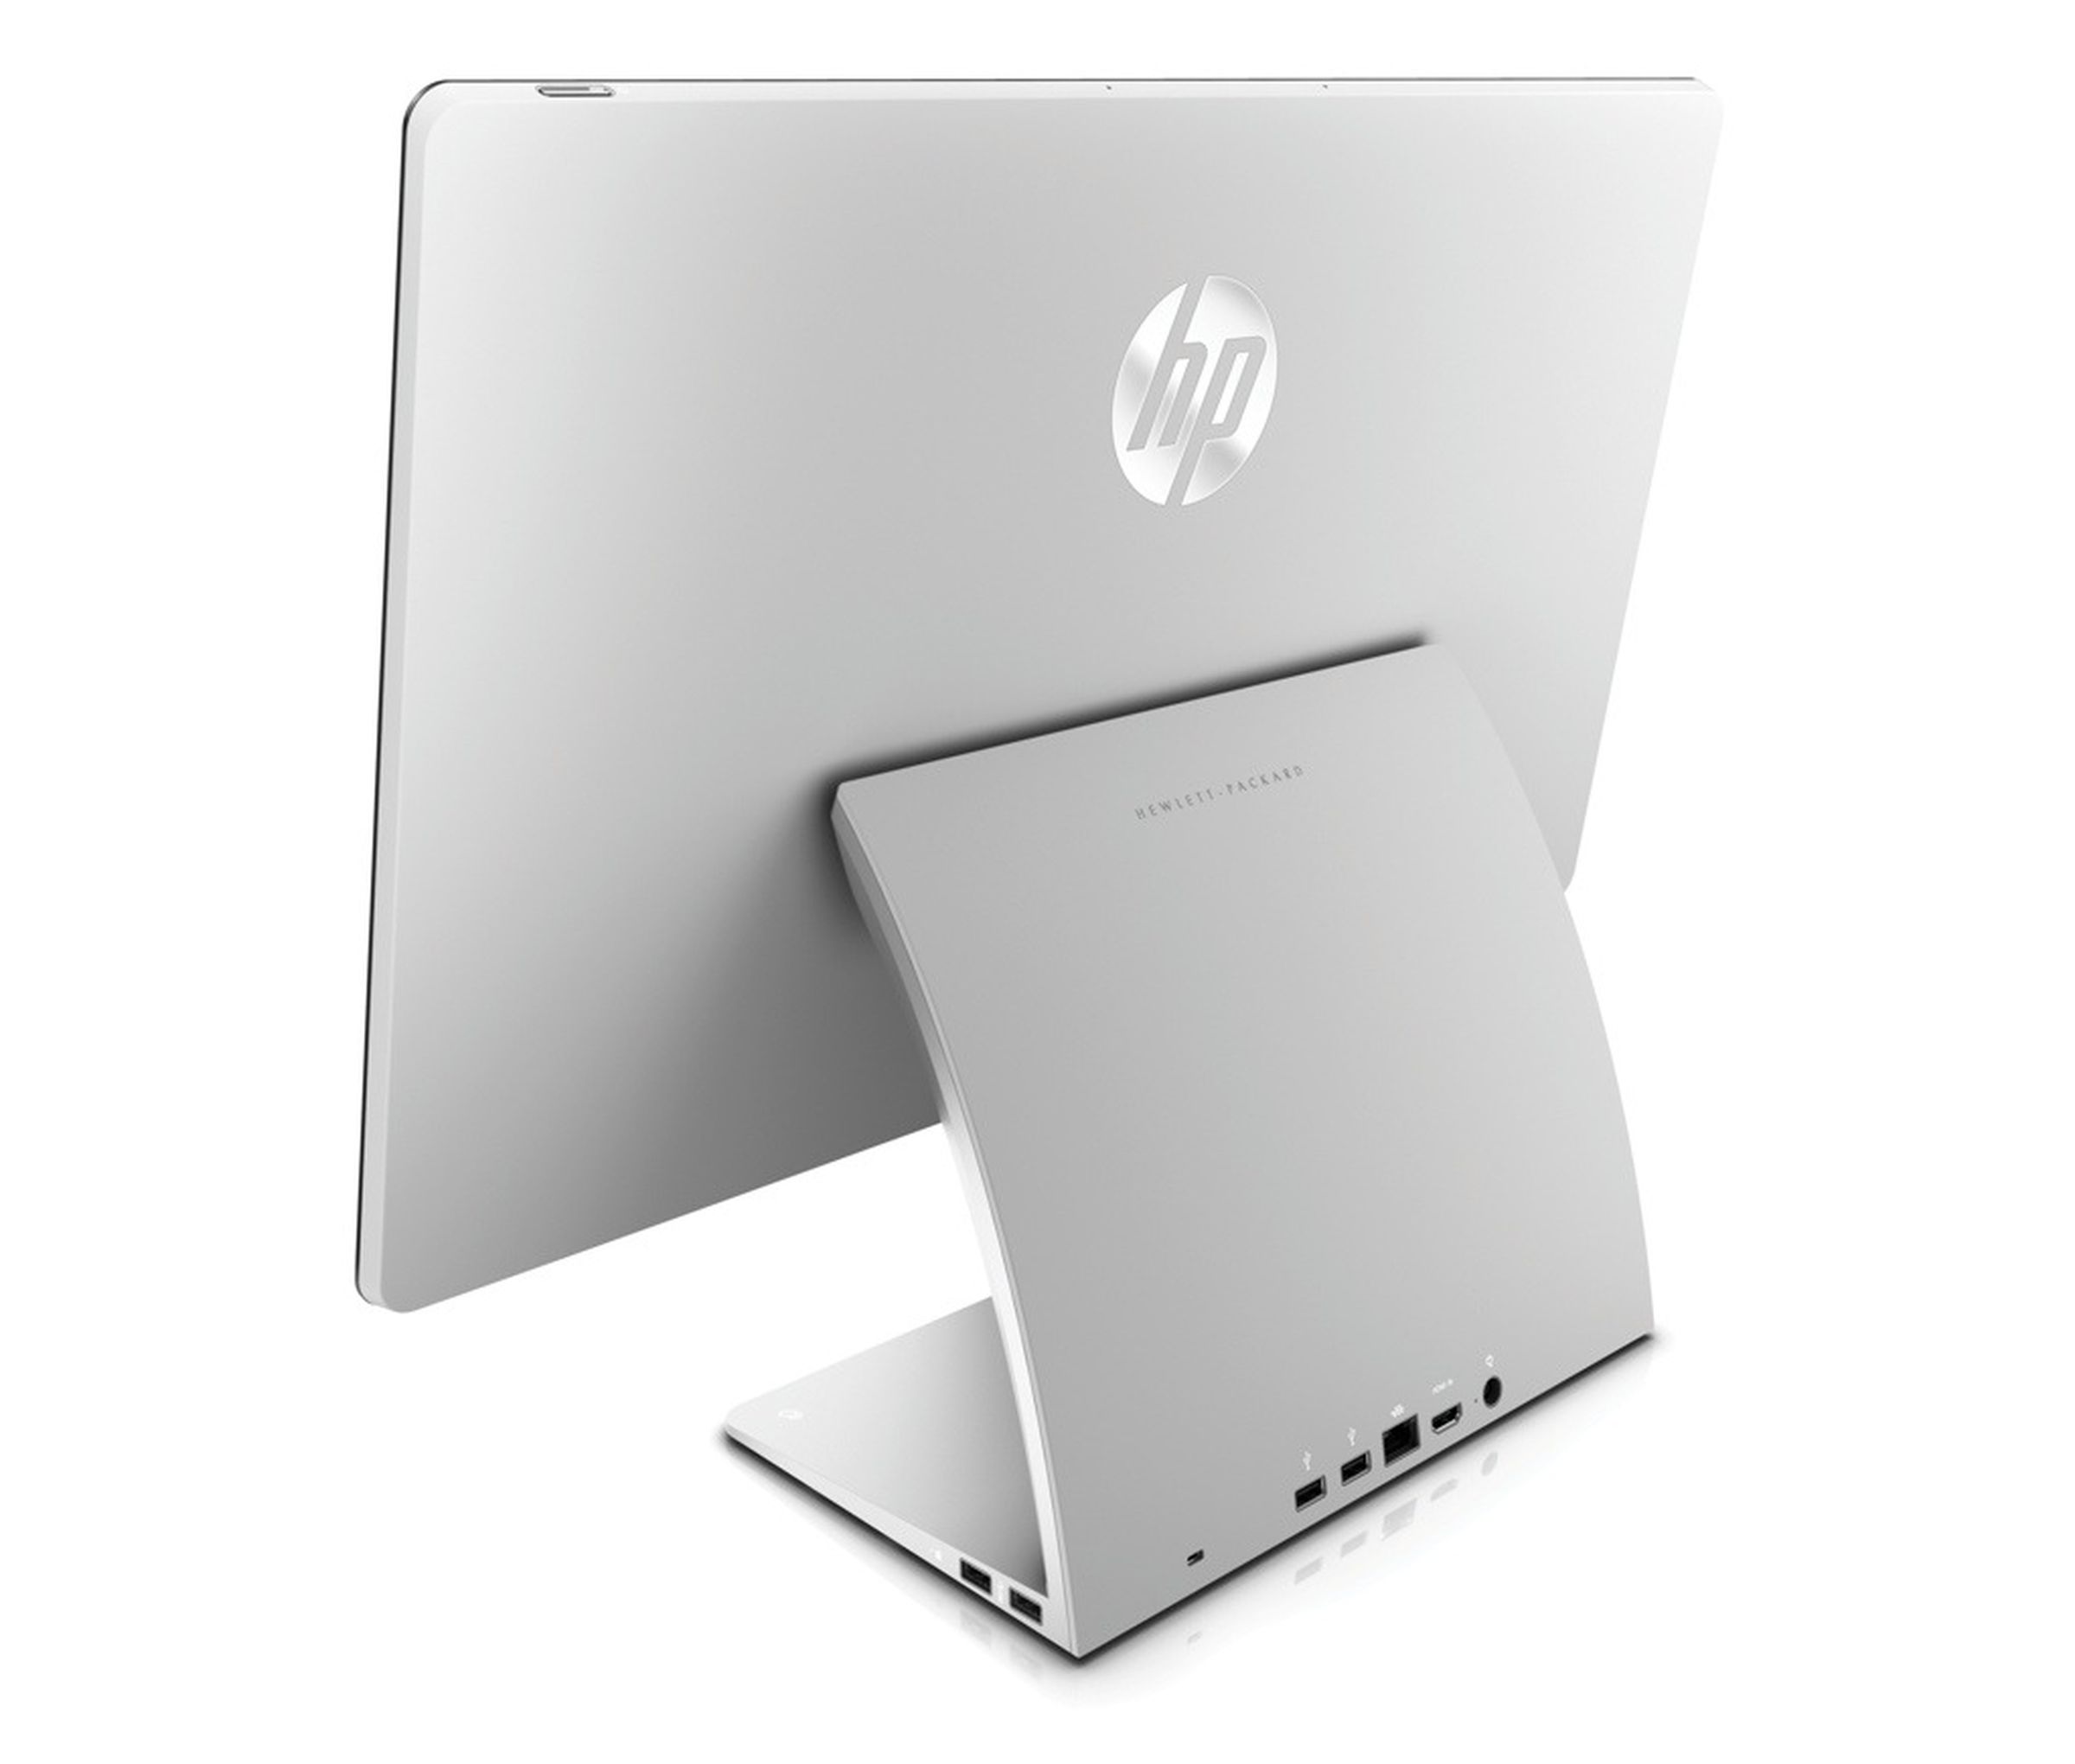 HP Spectre One all-in-one desktop official photos